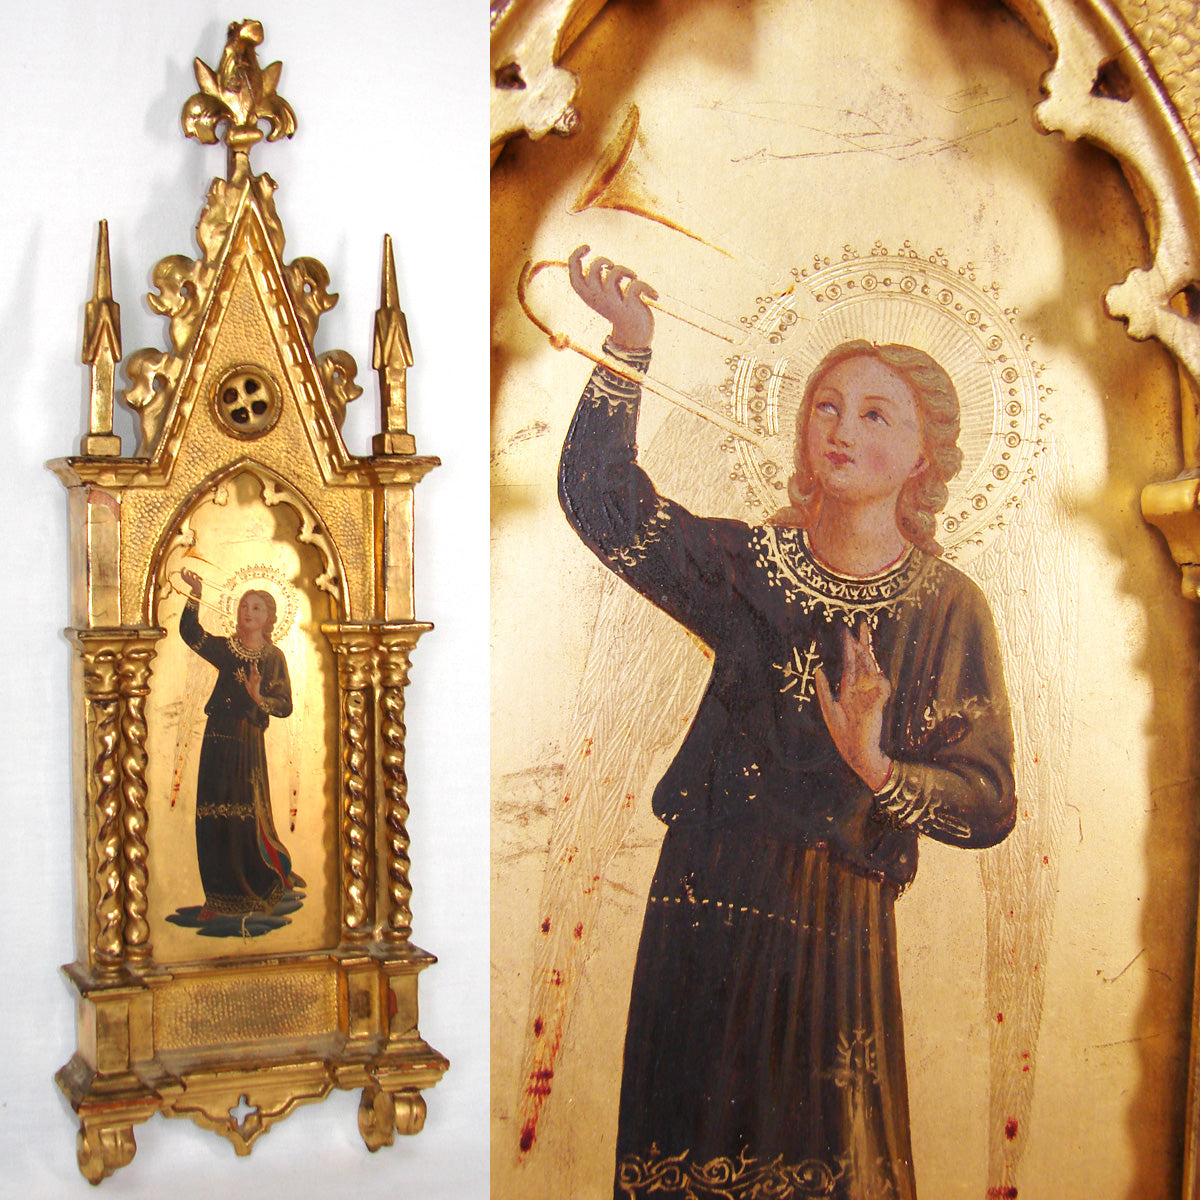 Fab Antique Florentine Gilt Carved 18" Gothic Style Frame with Illuminated Painting of Gabriel on Wood Panel